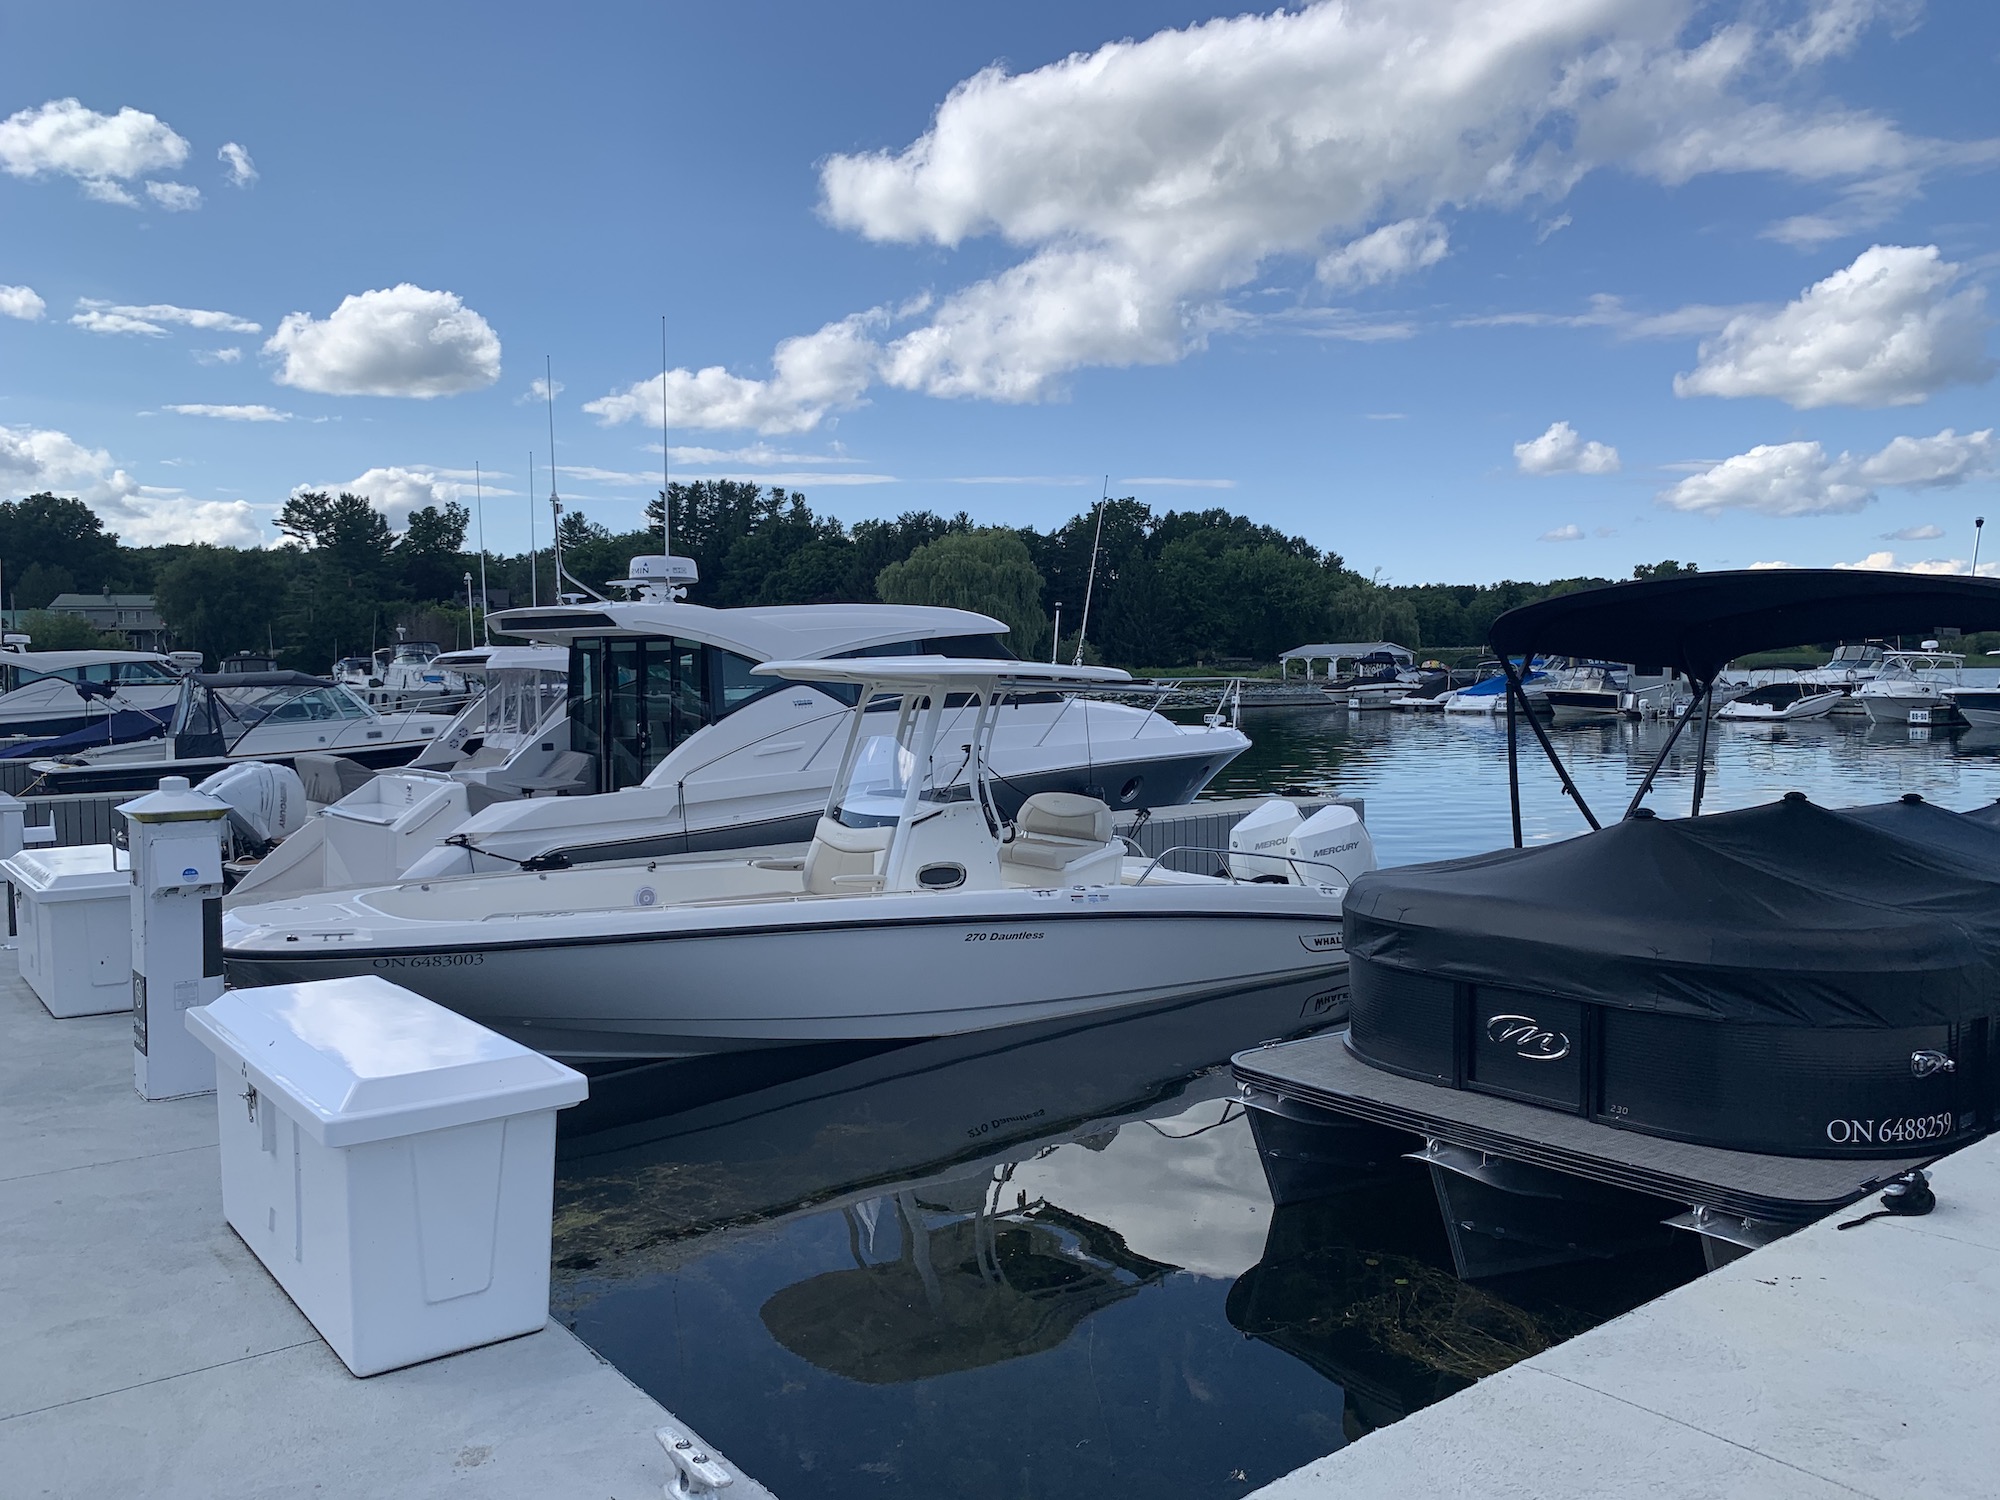 Boat Services - Warranty and Repair